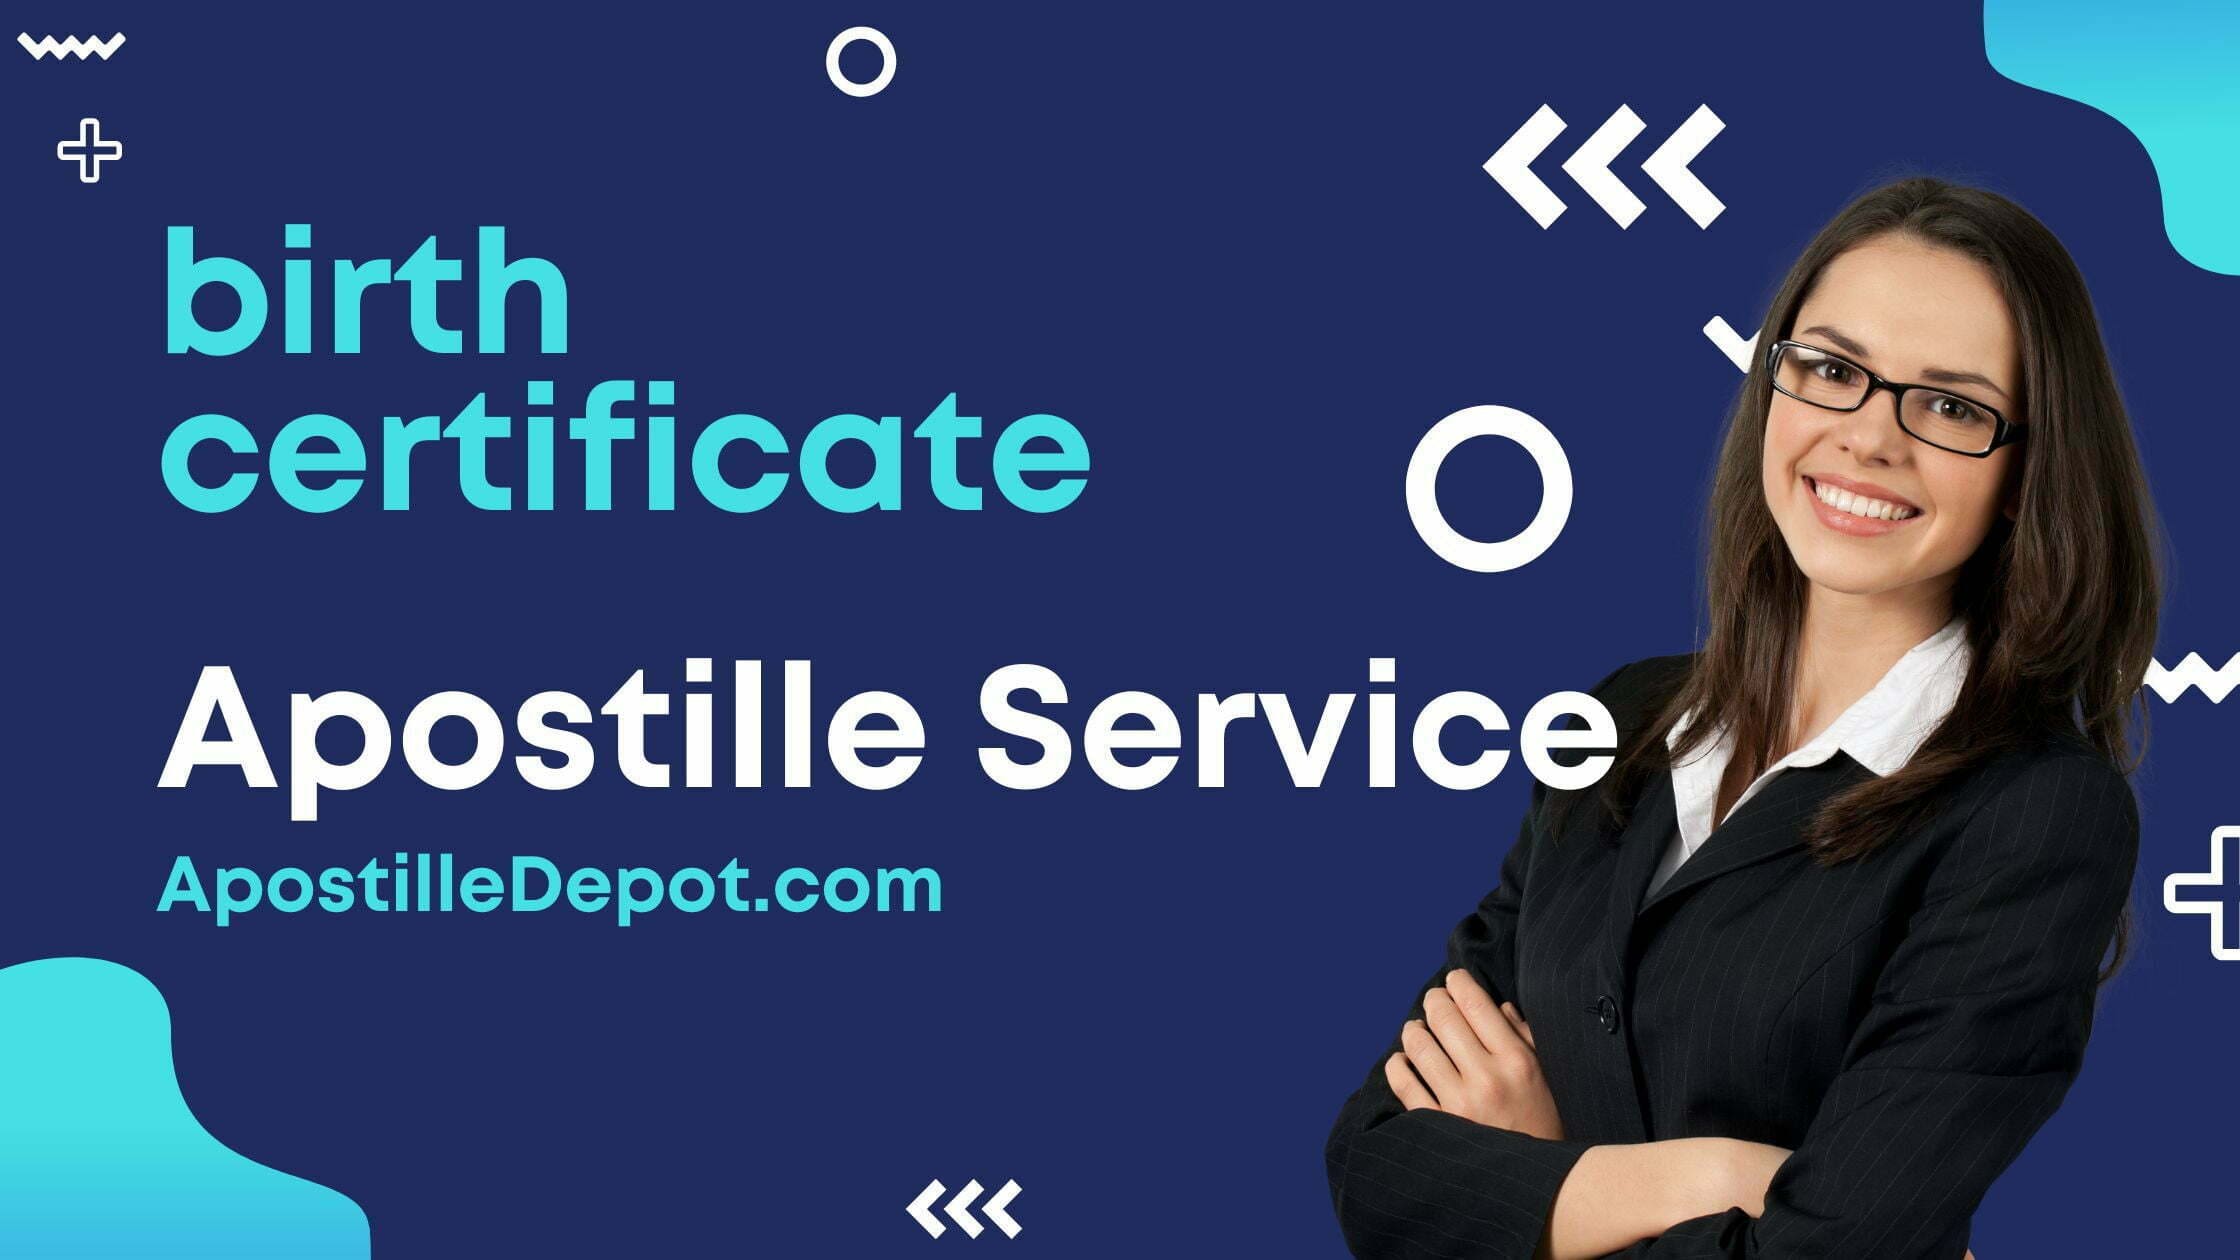 How much does an apostille service cost?